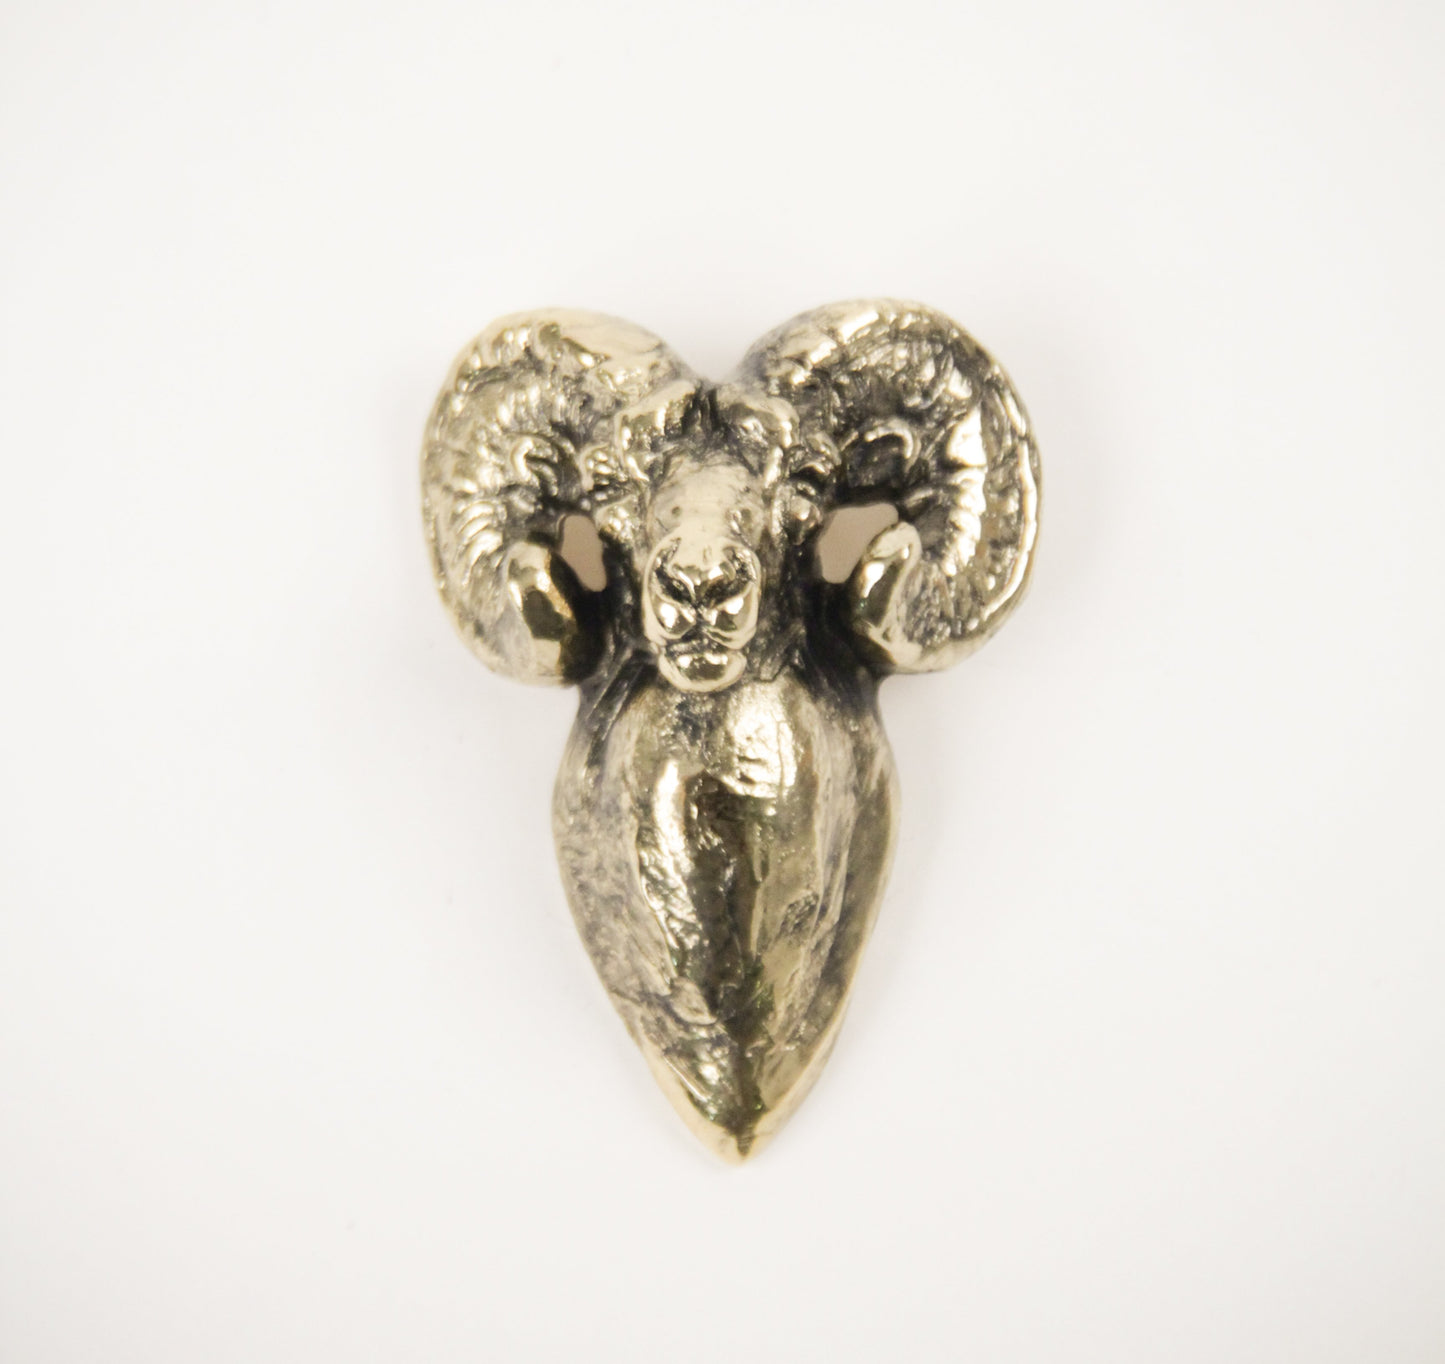 2018 prix de west bolo tie bighorn sheep by Tim Shinabarger gold